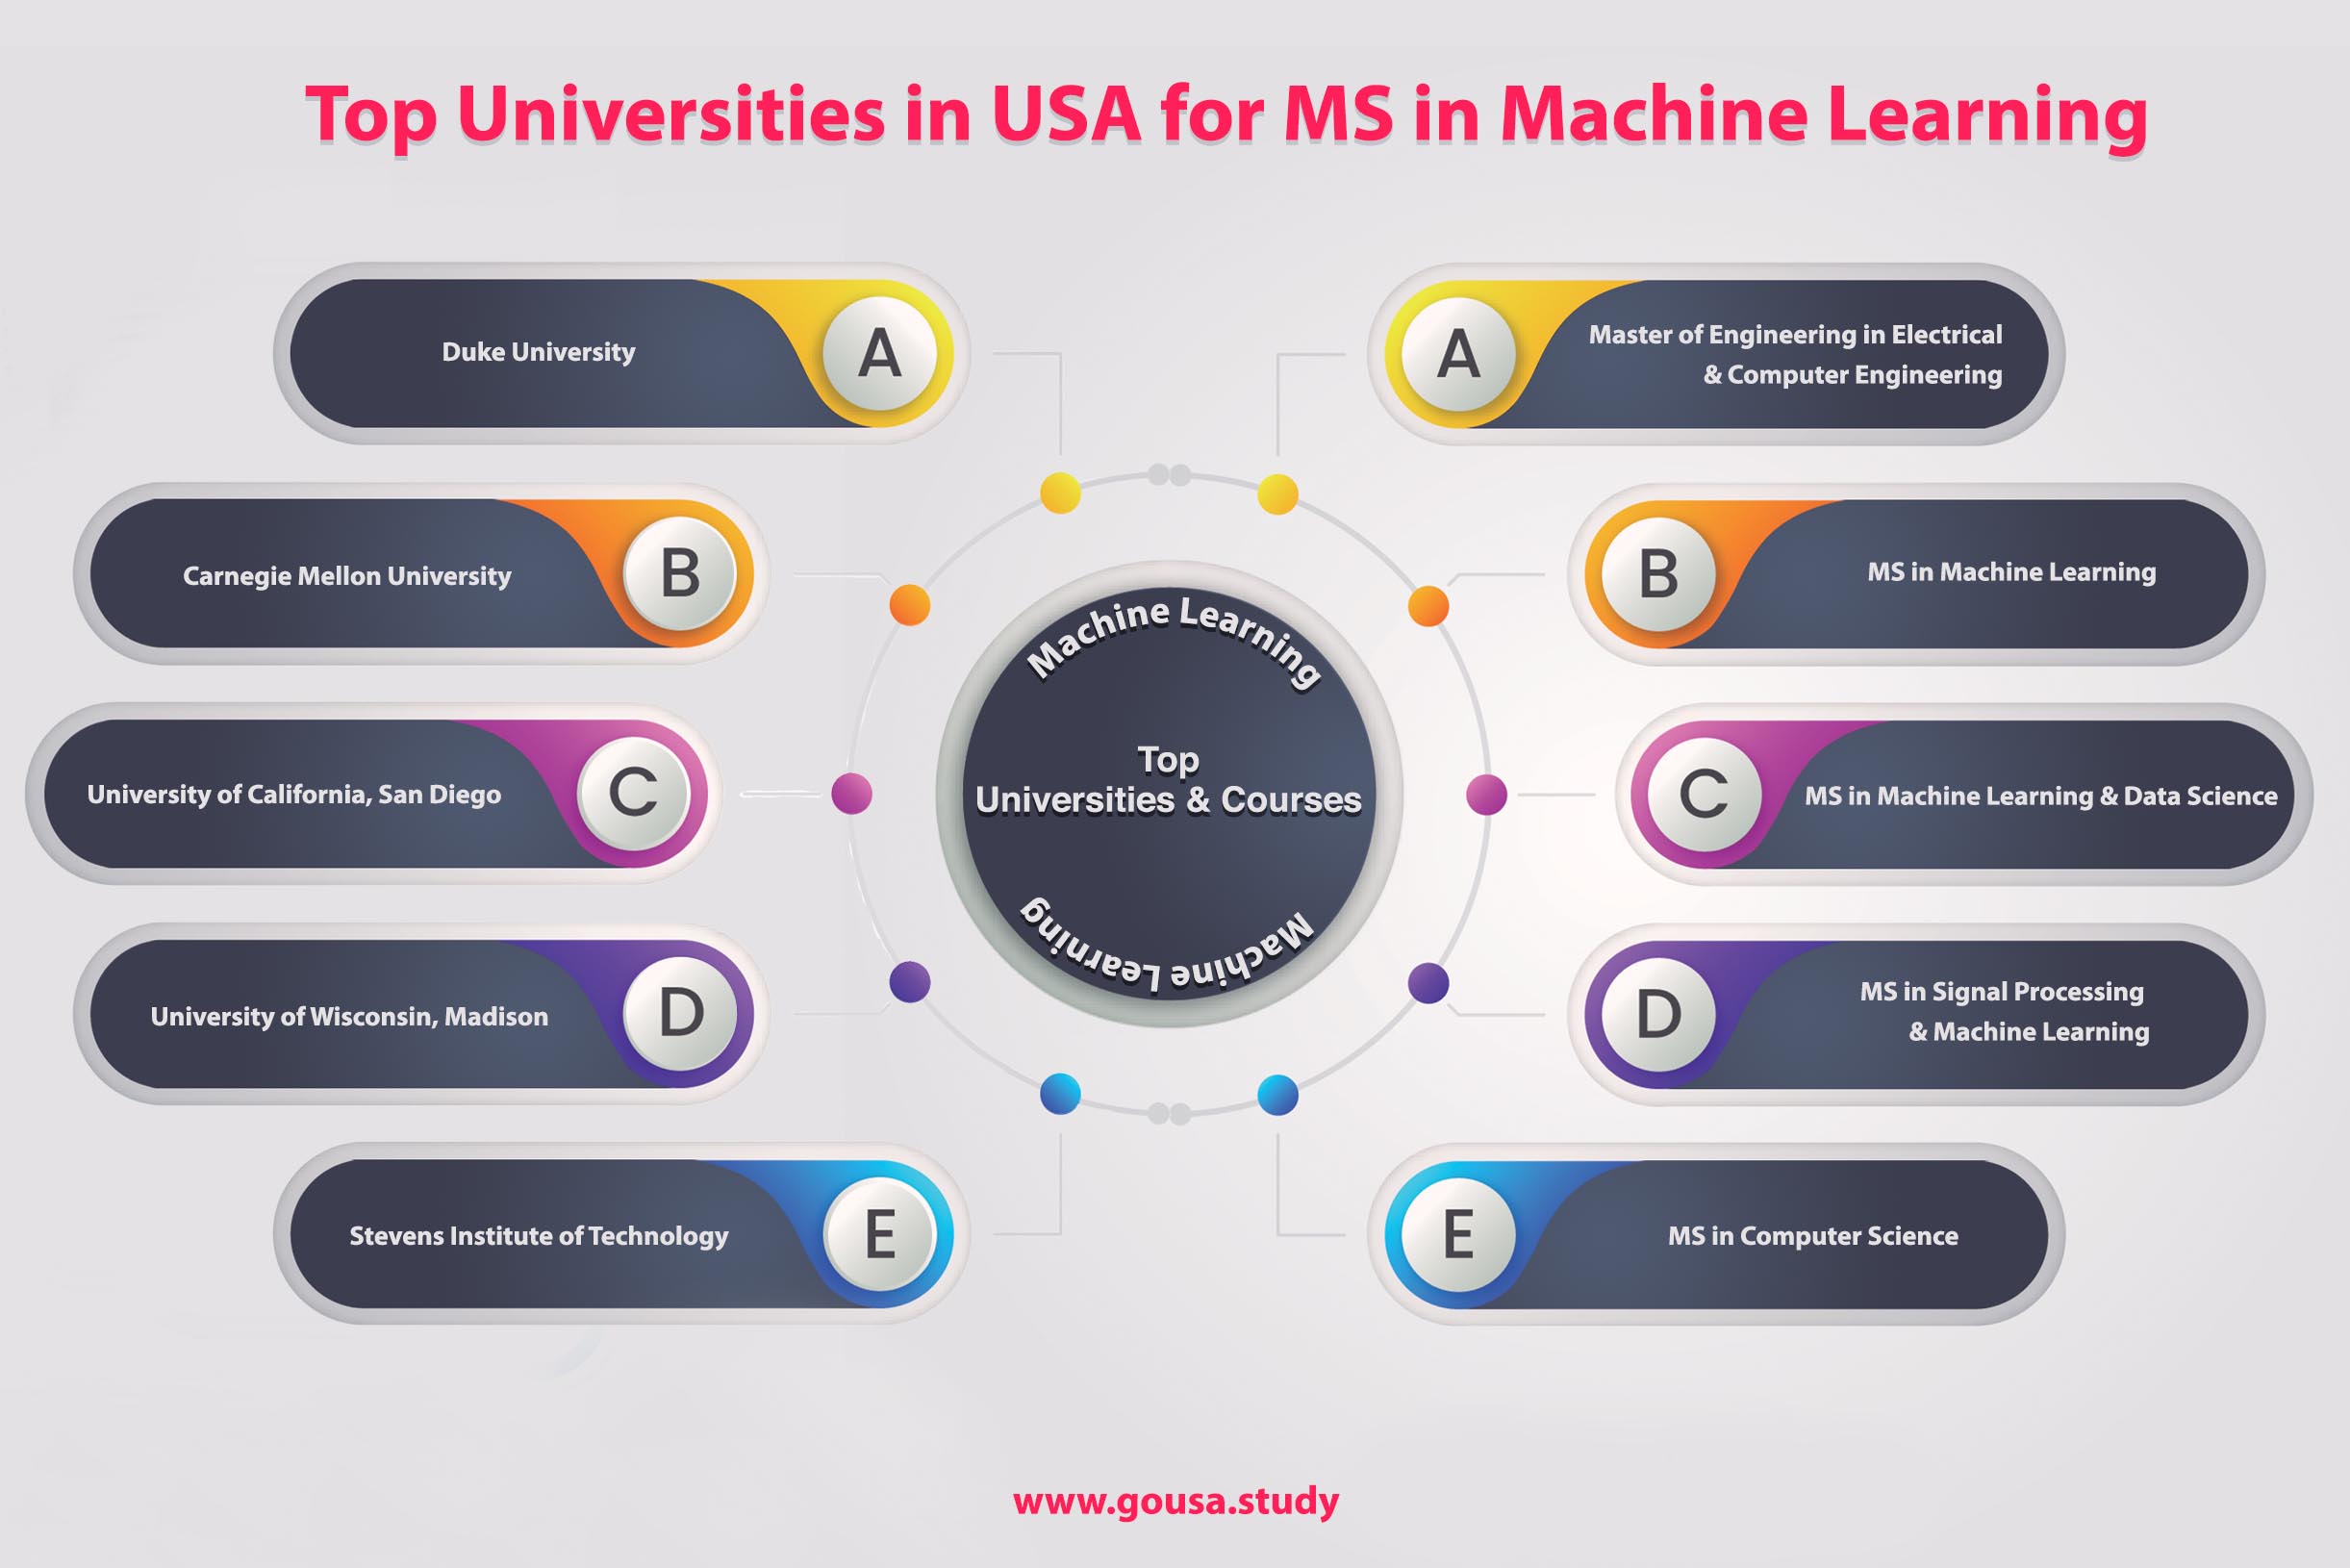 Top Universities in USA for MS in Machine Learning